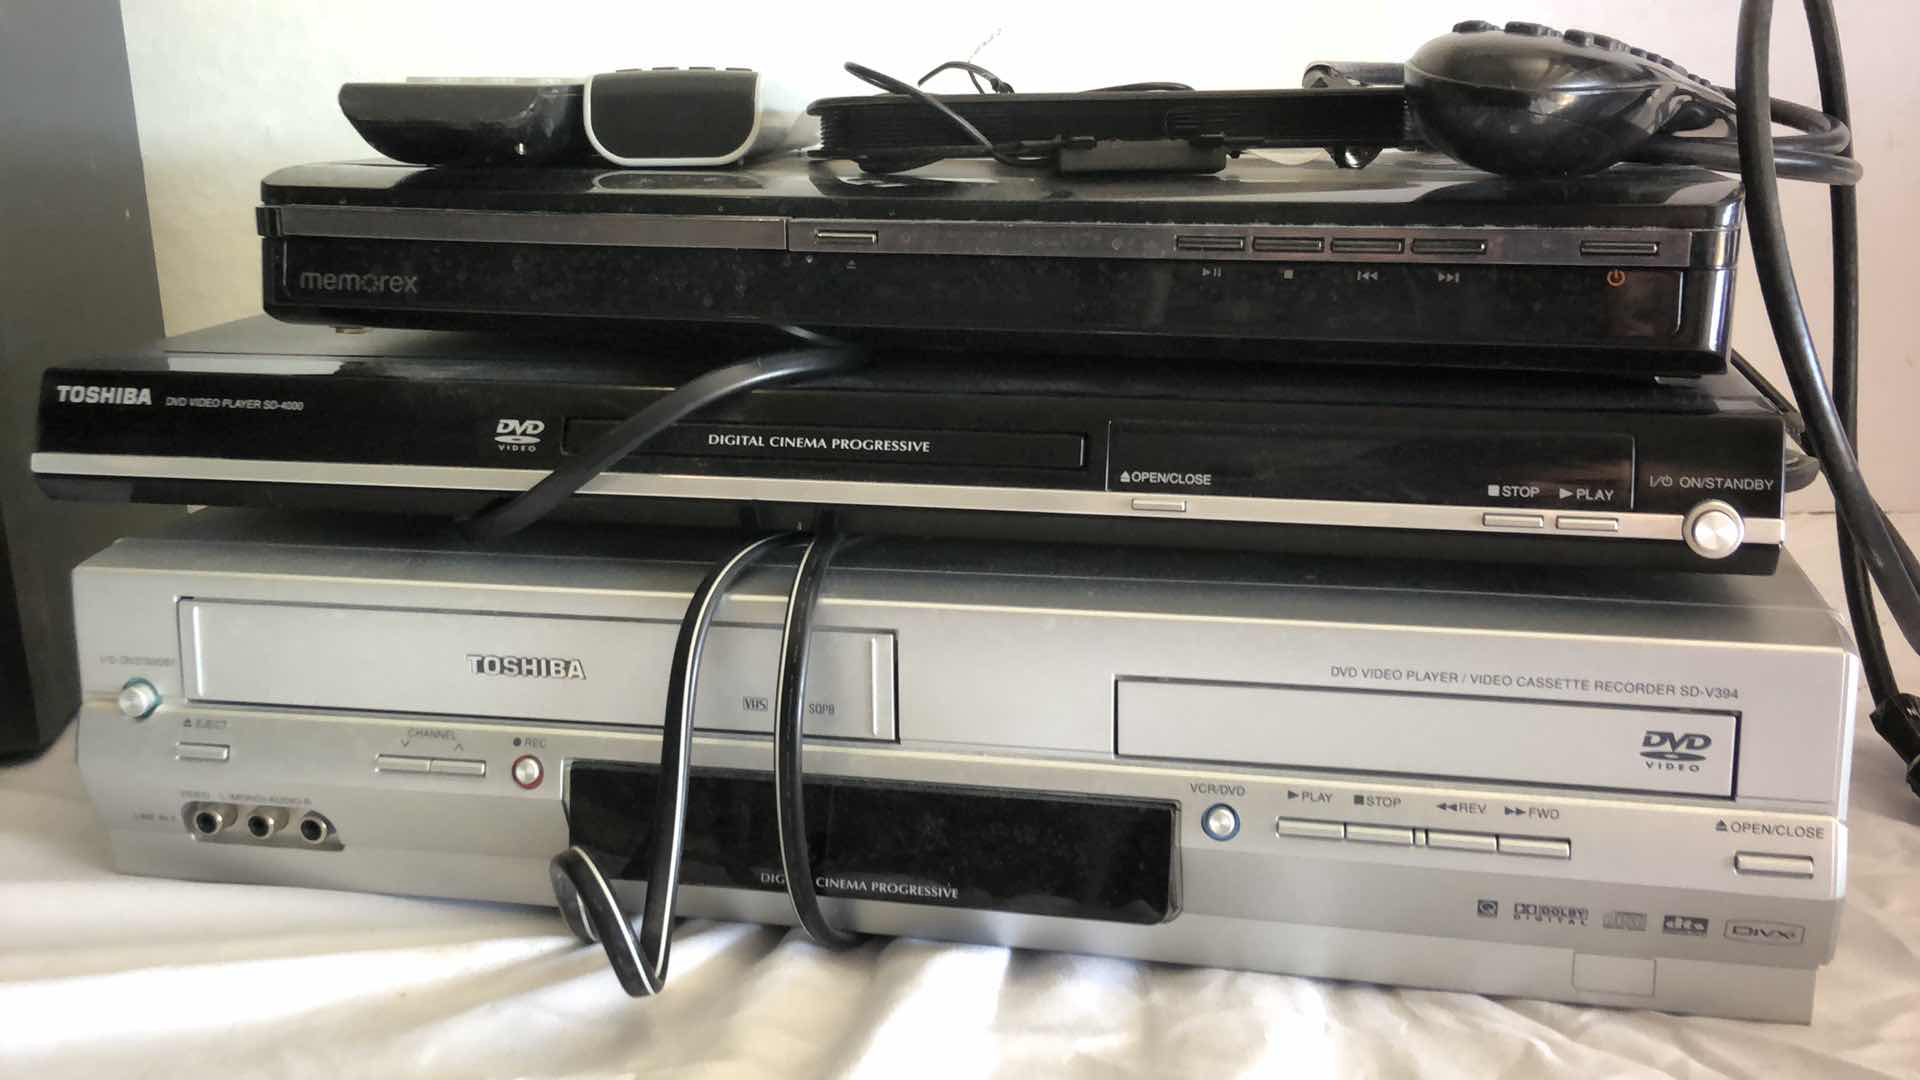 Photo 5 of ENTERTAINMENT BUNDLE RCA RS-255KM AUDIO SYSTEM, DVD AND VHS PLAYERS W REMOTES, STAR TREK VHS SETS